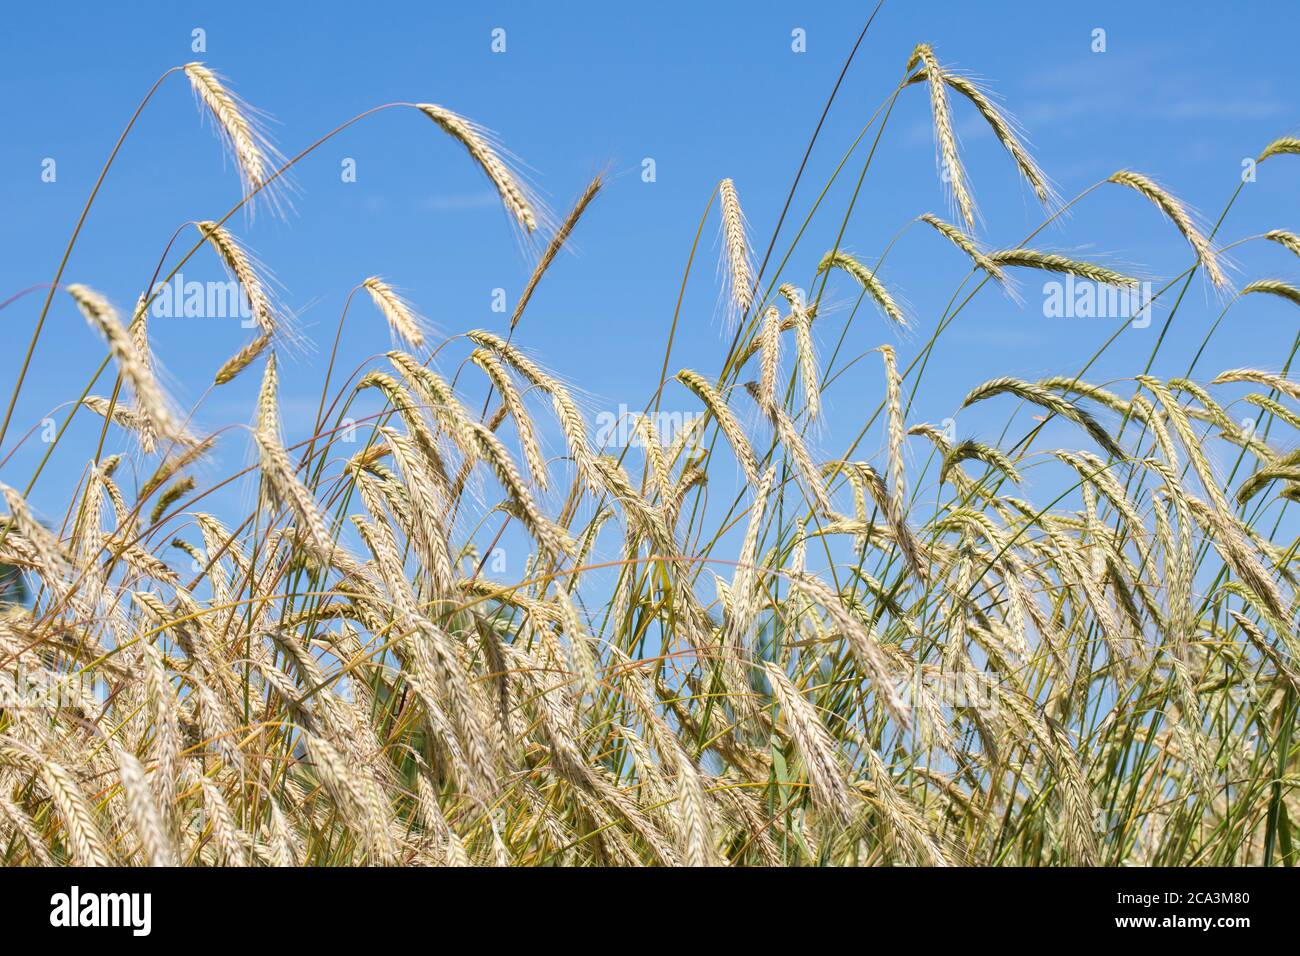 Rye field against blue sky. Symbol for organic ingredients, agriculture, farming. Latin name of shown rye: Secale cereale afghanicum Stock Photo